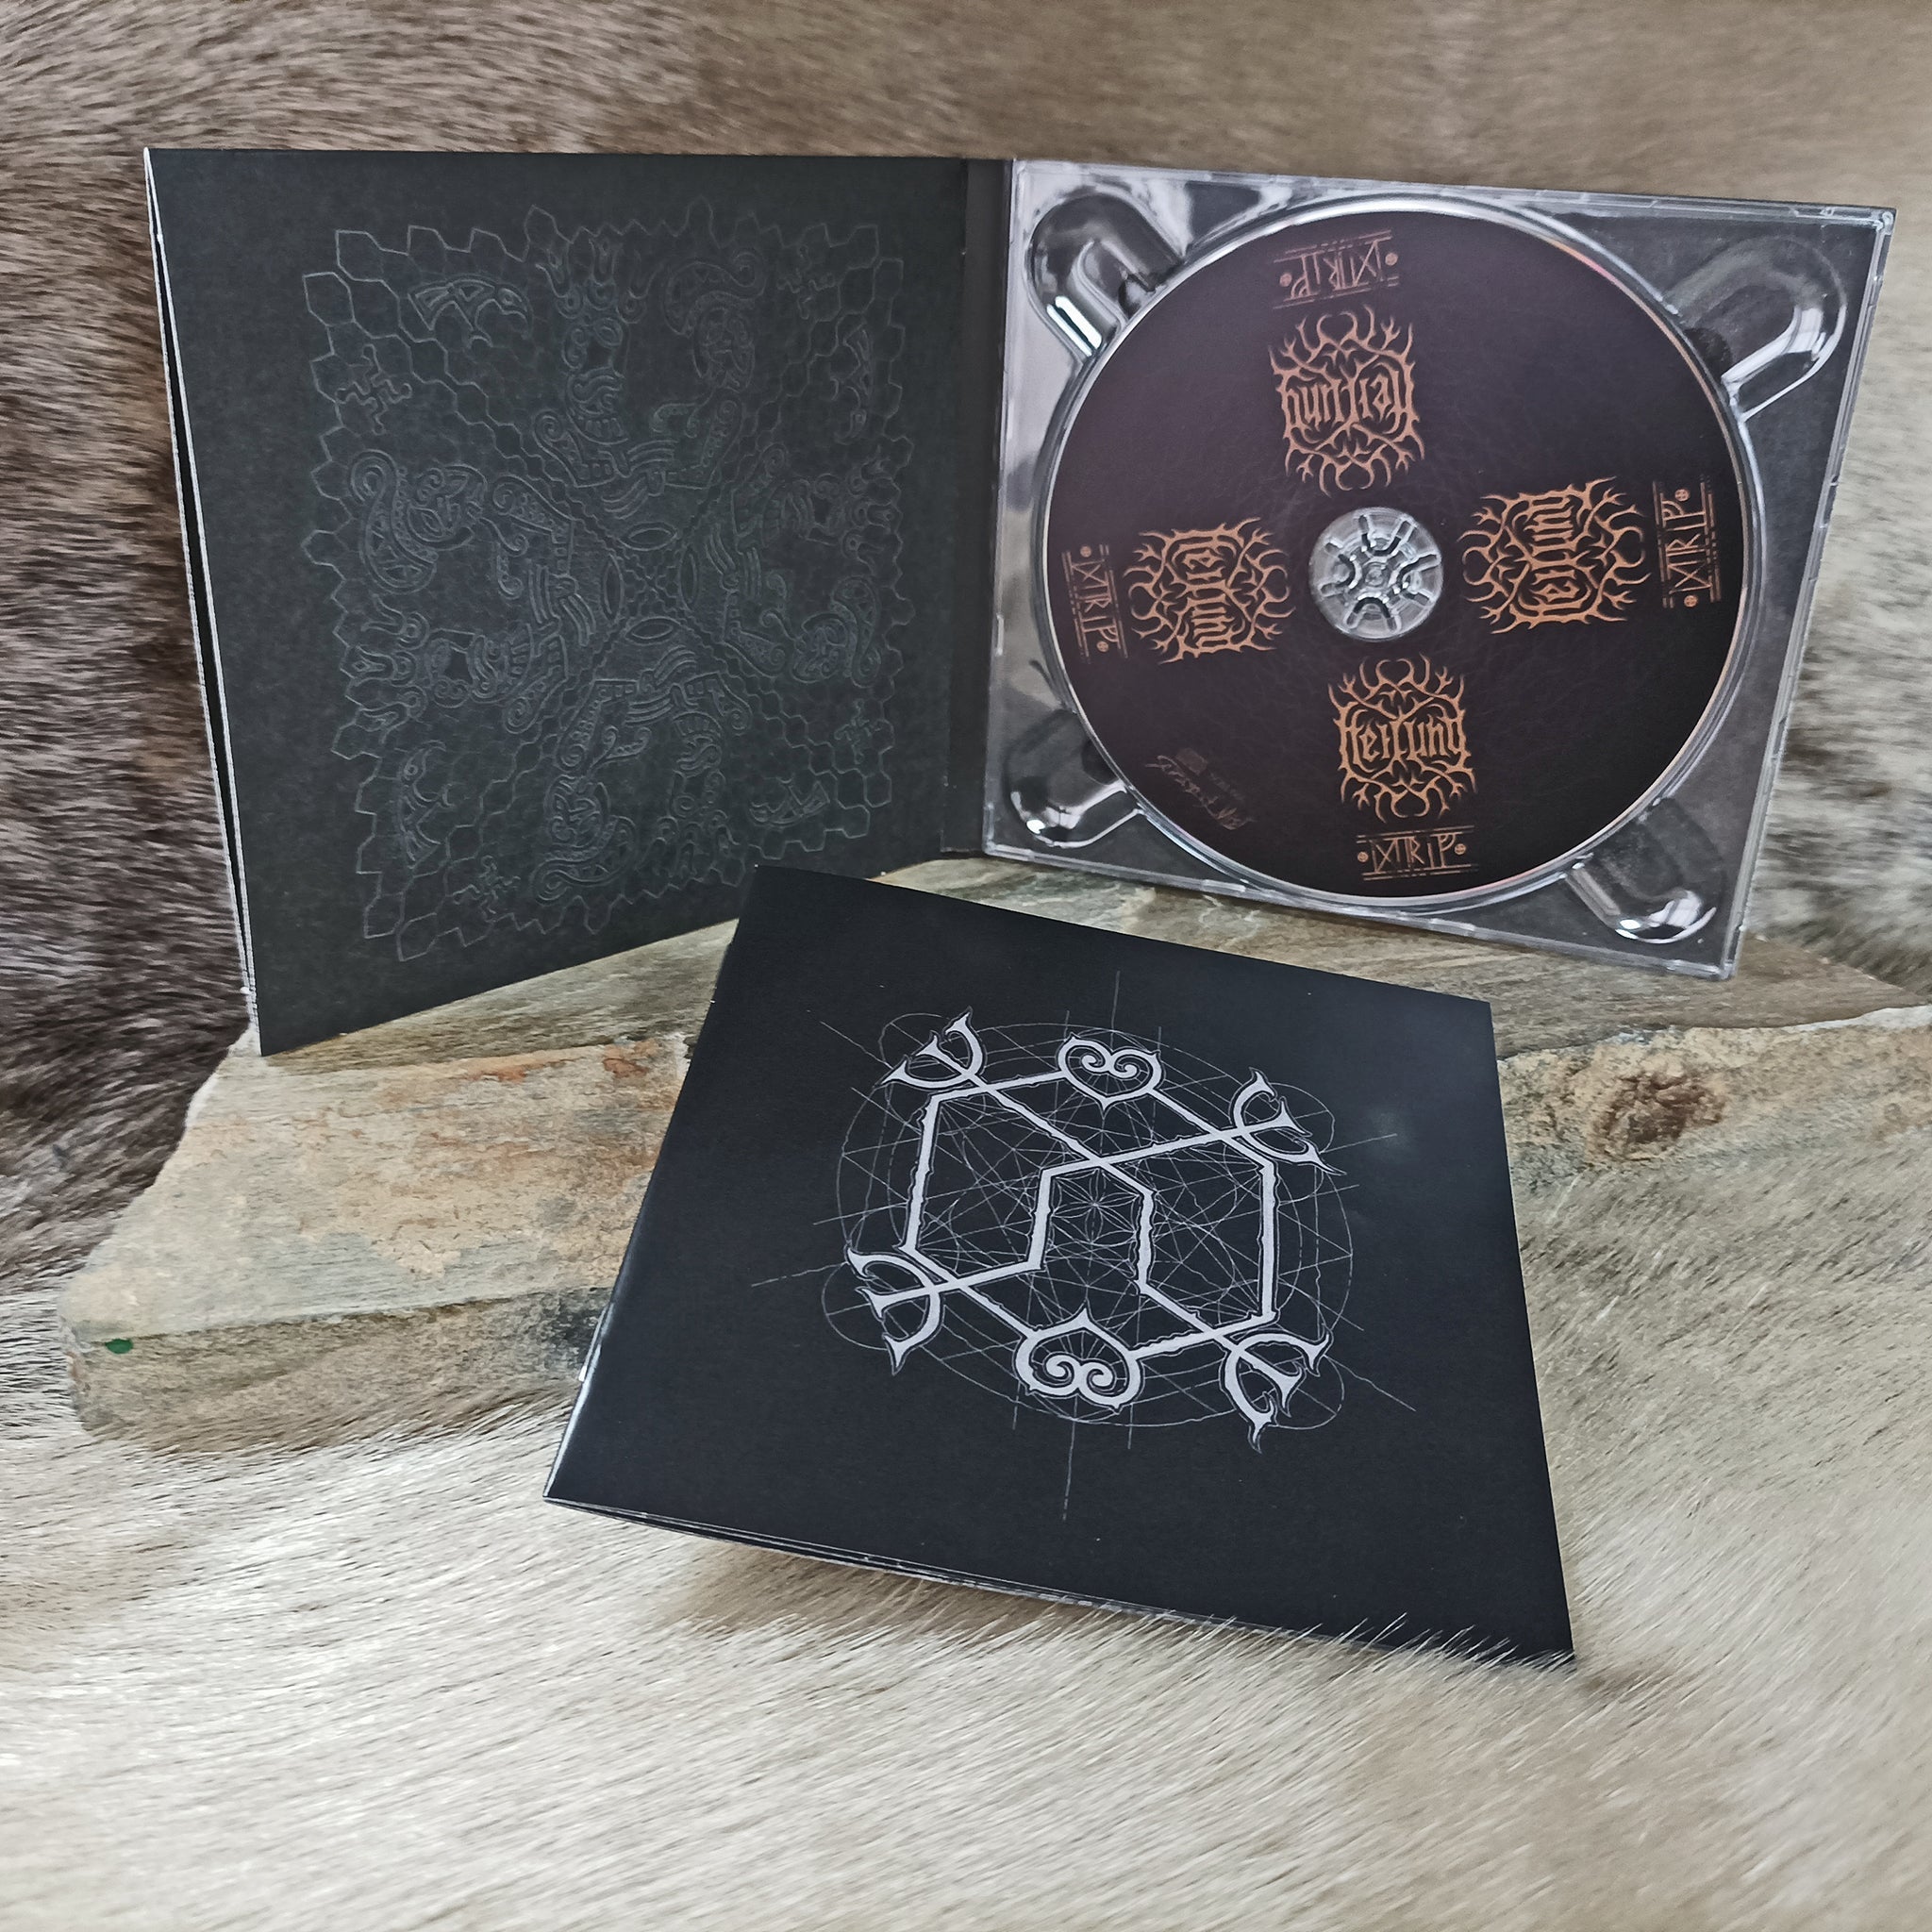 Drif CD by Heilung - Case and Booklet Display